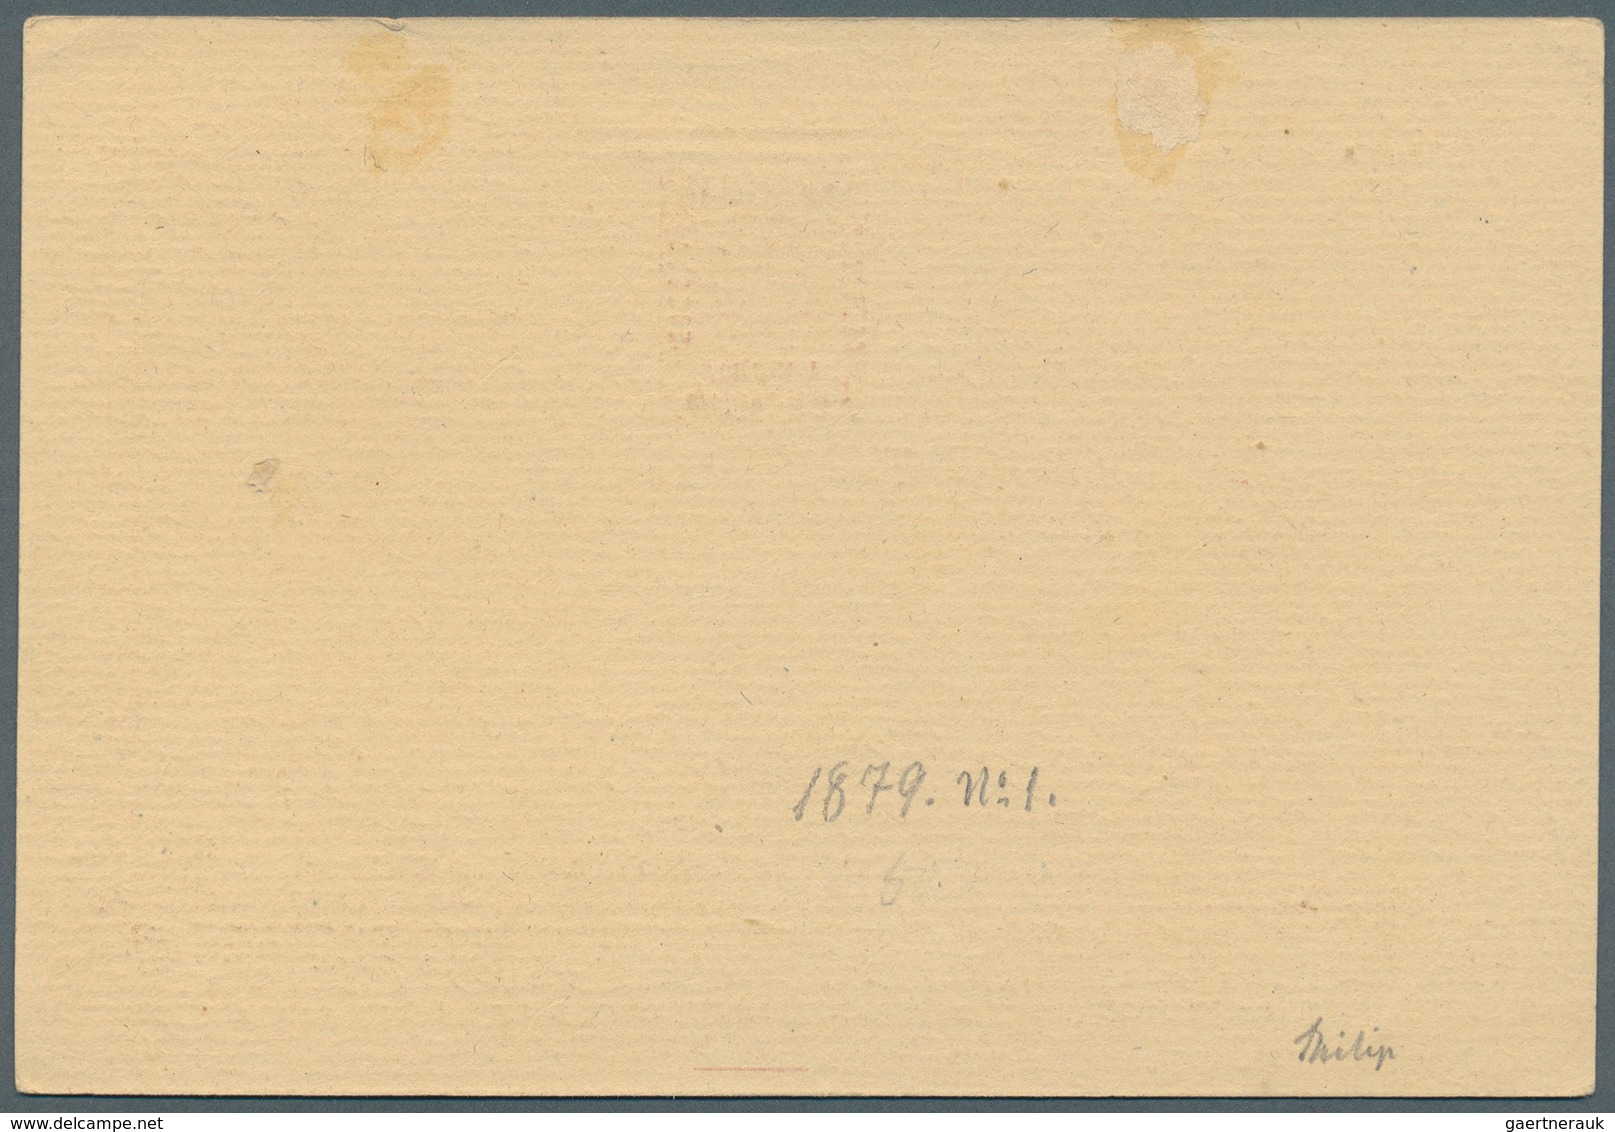 00409 Philippinen: 1880 UPU surcharge 3c/50c, tied by oval cancel of crosses in association with Manila di